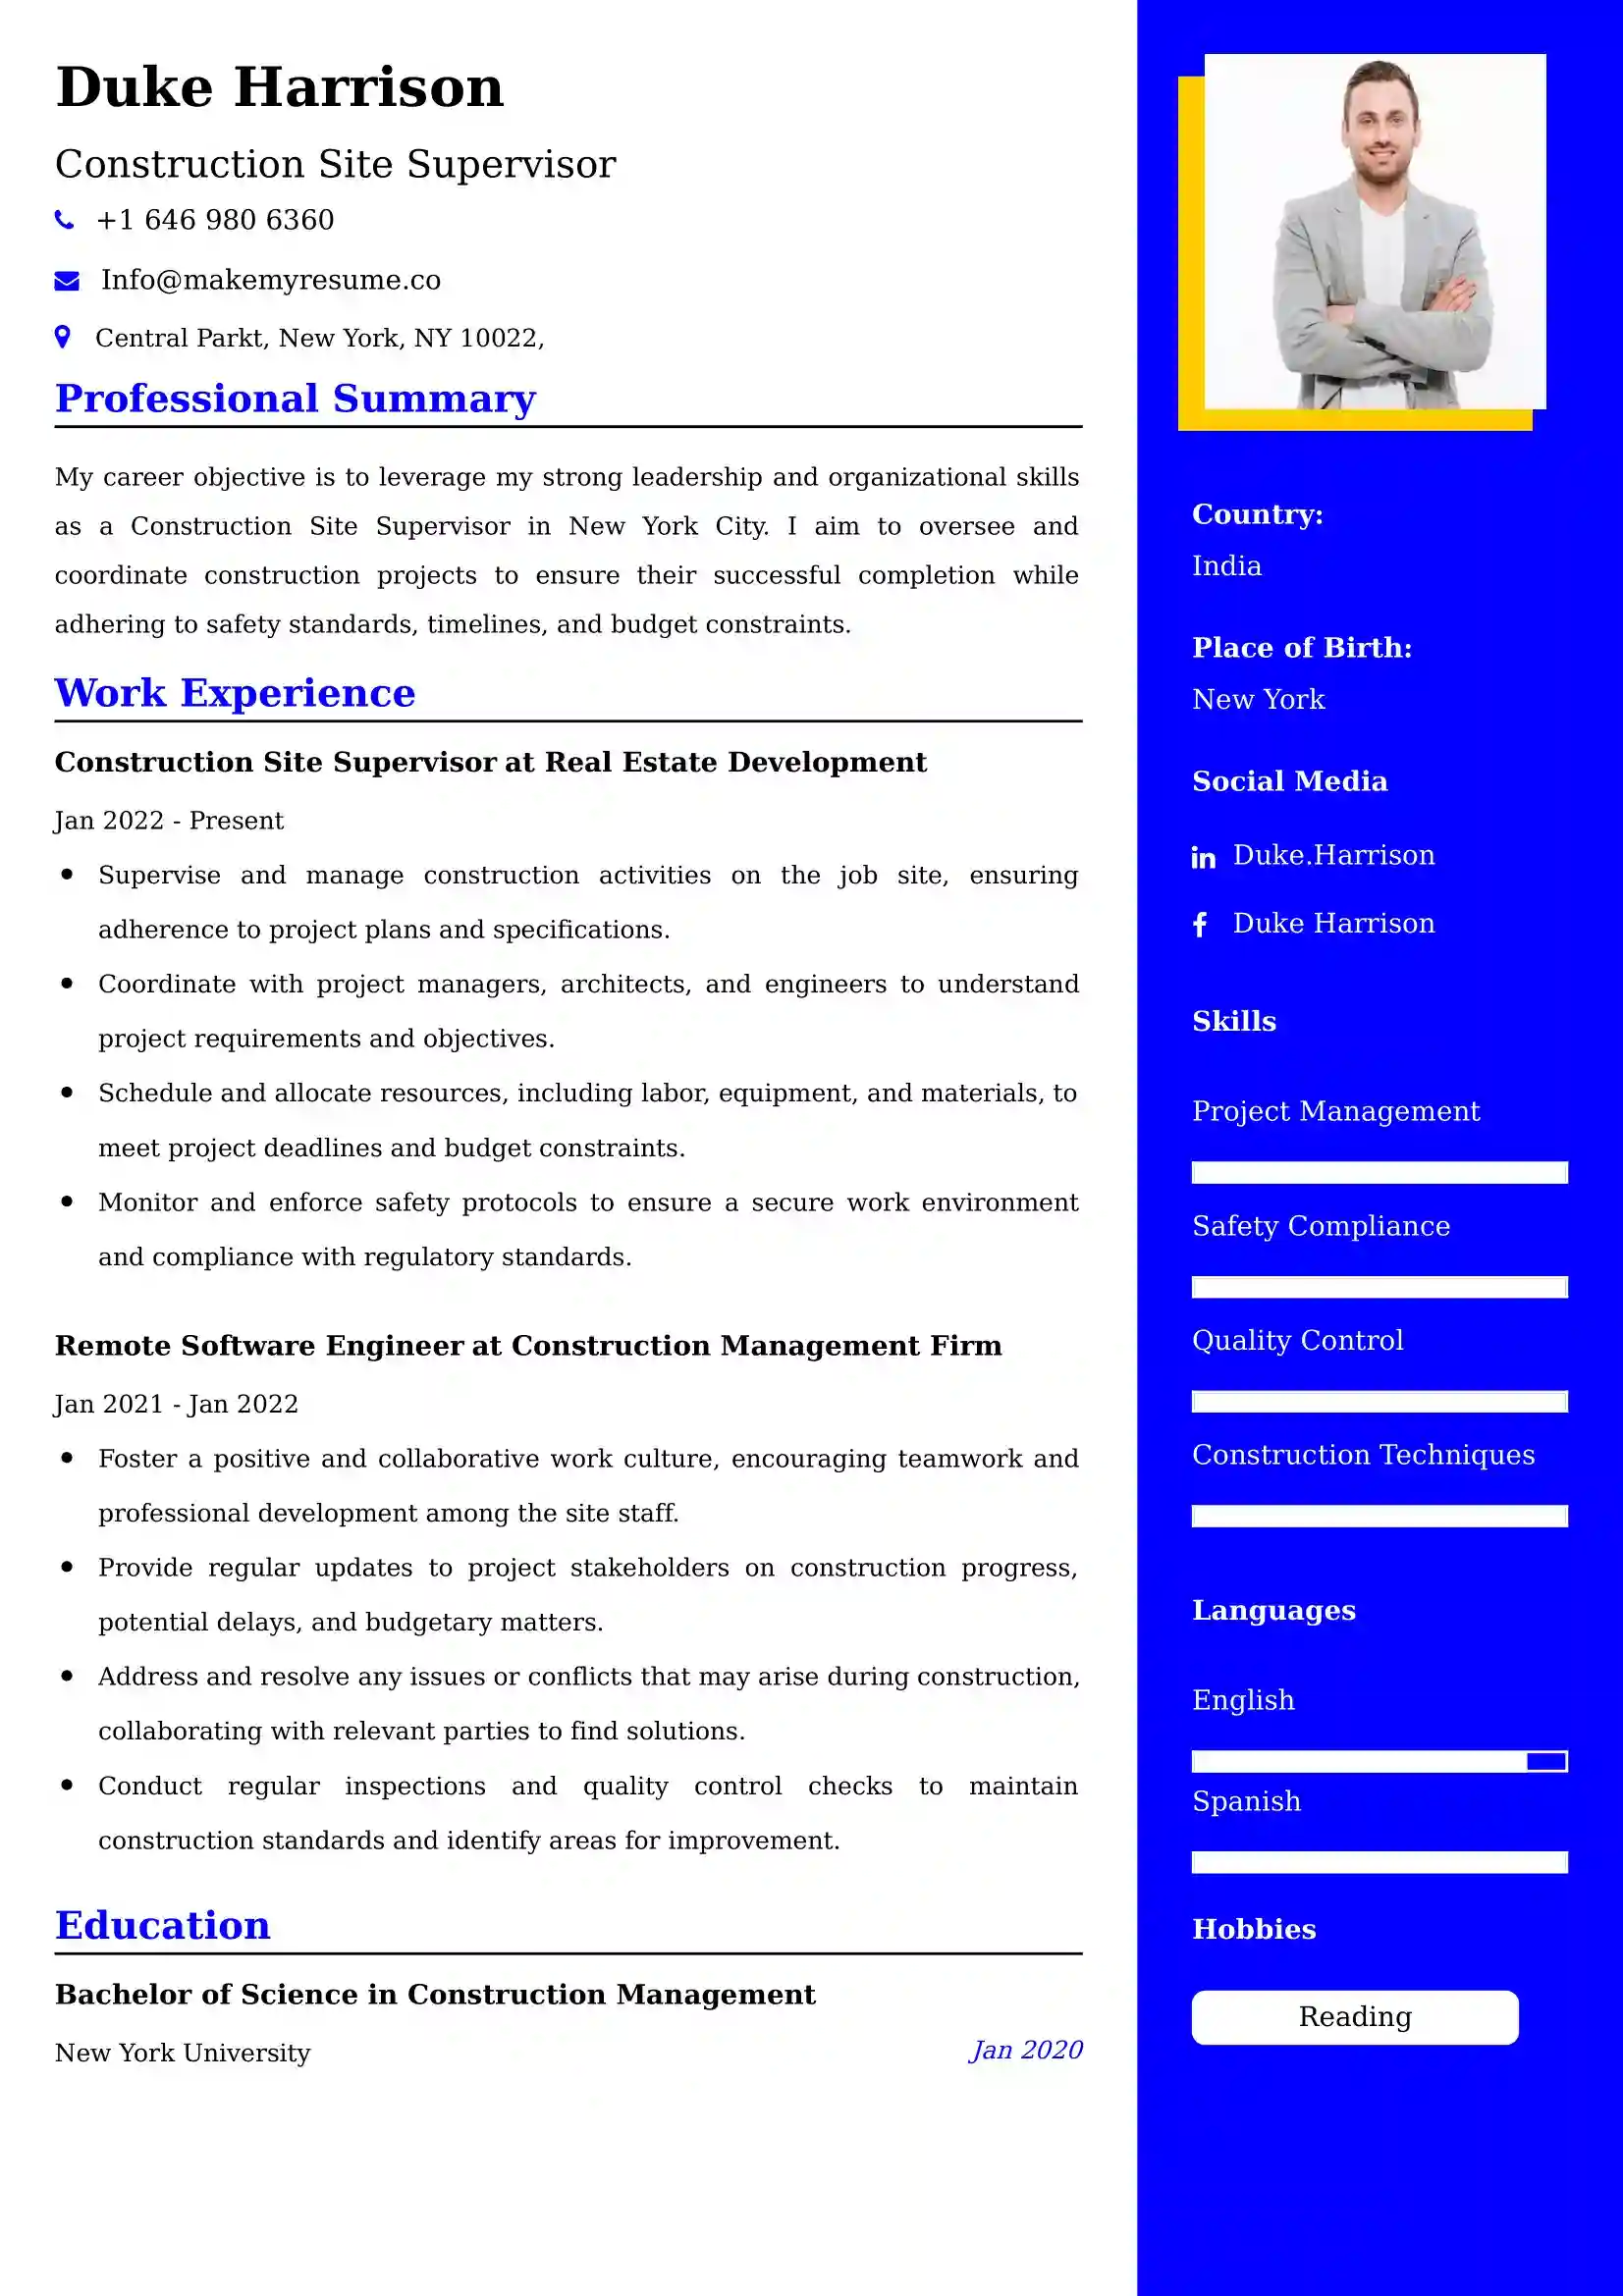 Construction Site Supervisor Resume Examples for UK Jobs - Tips and Guide